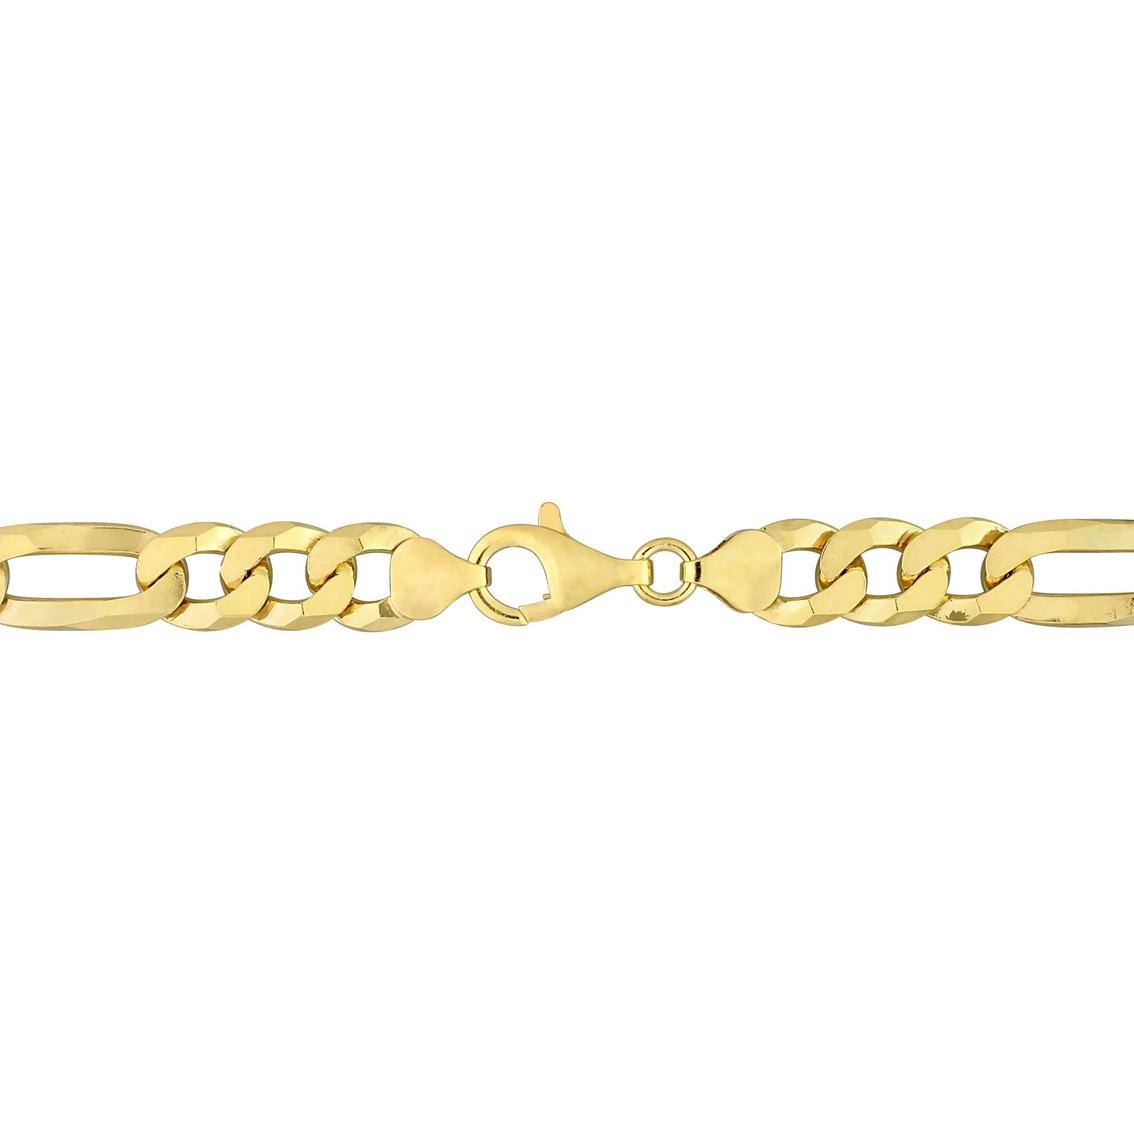 Sofia B. 18K Gold Plated Sterling Silver 8.9mm Flat Figaro Chain Bracelet - Image 2 of 3